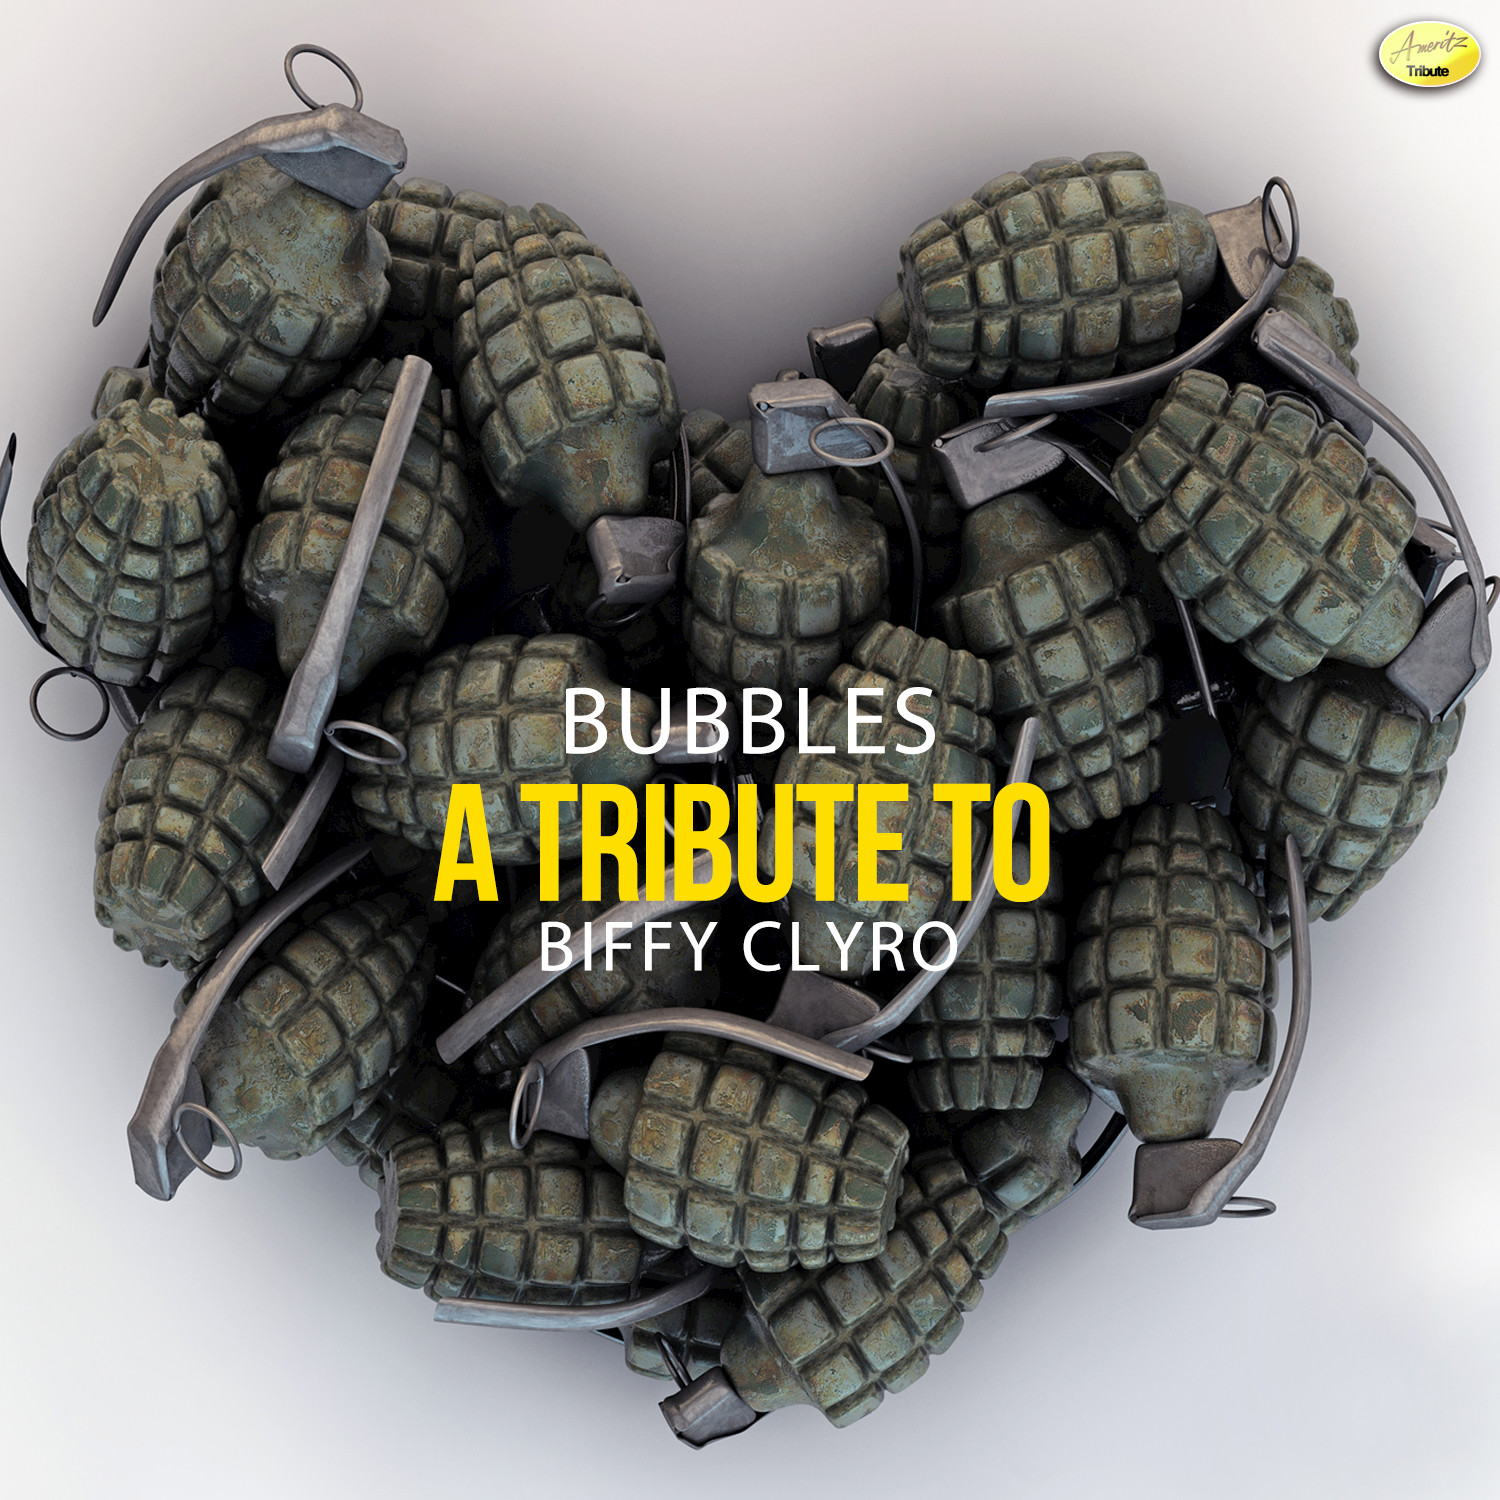 Bubbles - A Tribute to Biffy Clyro